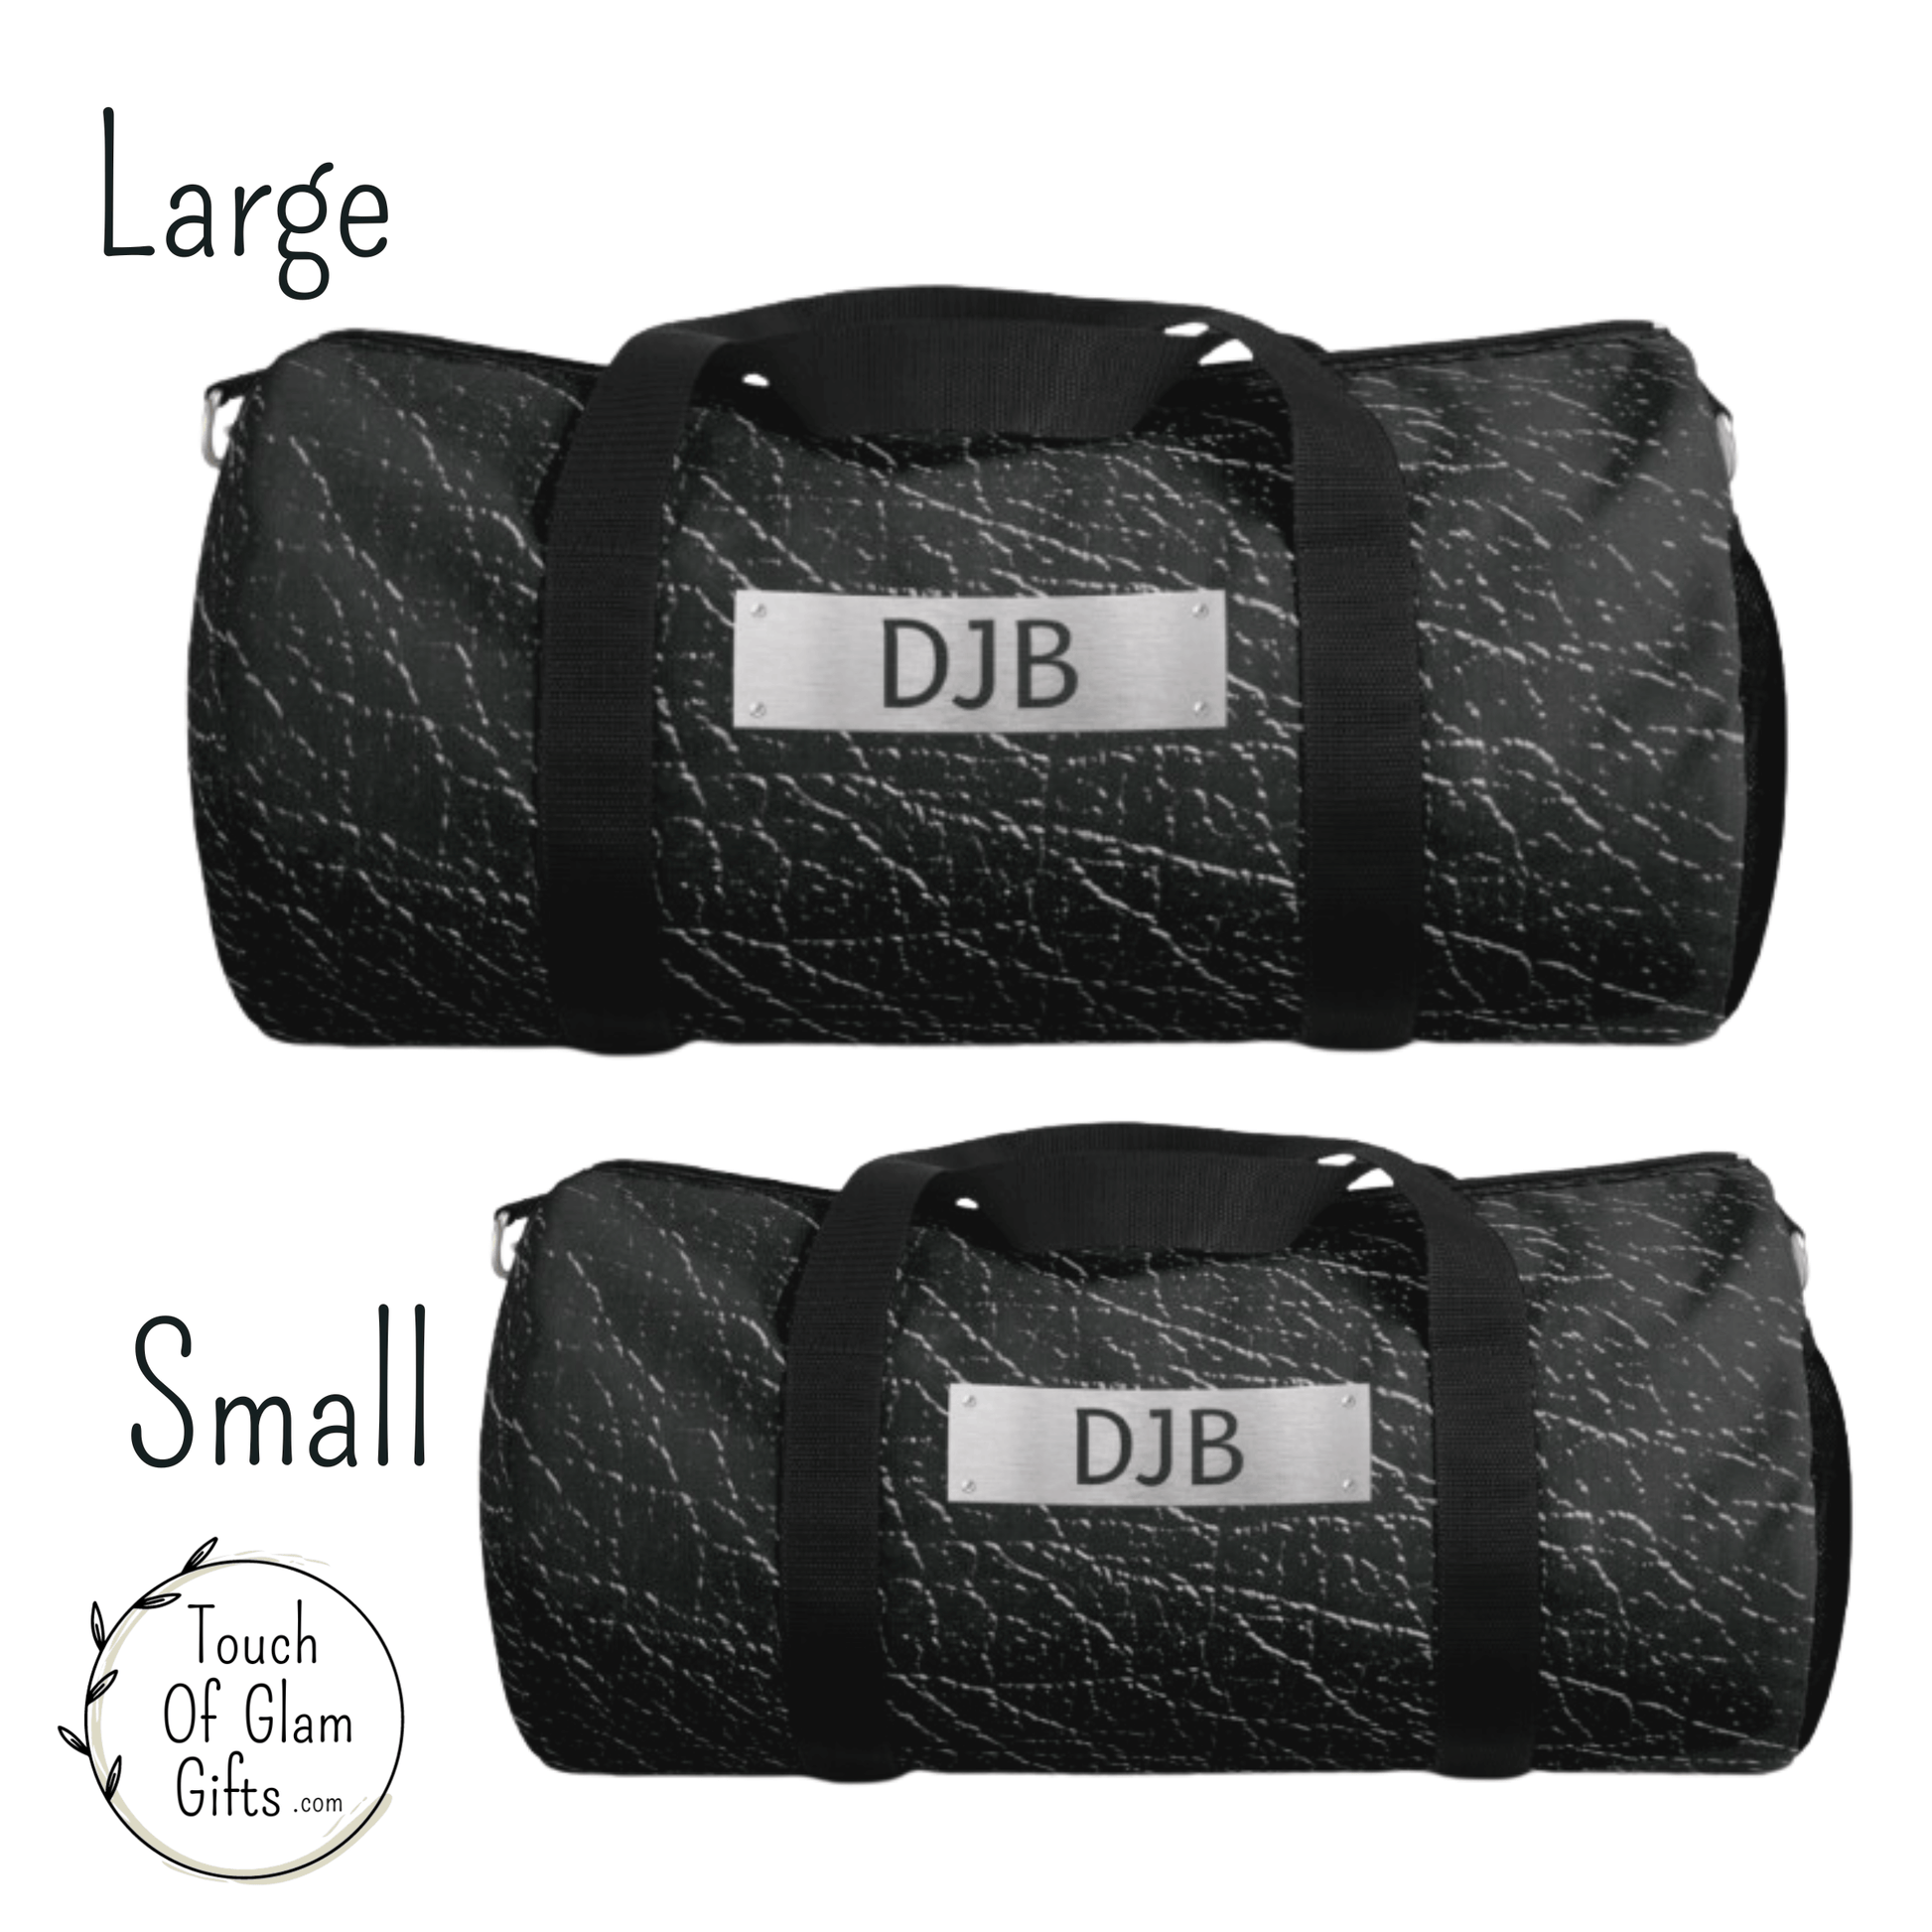 The front view of both duffel bags shows the steel plate with initials and handle straps and shoulder straps.